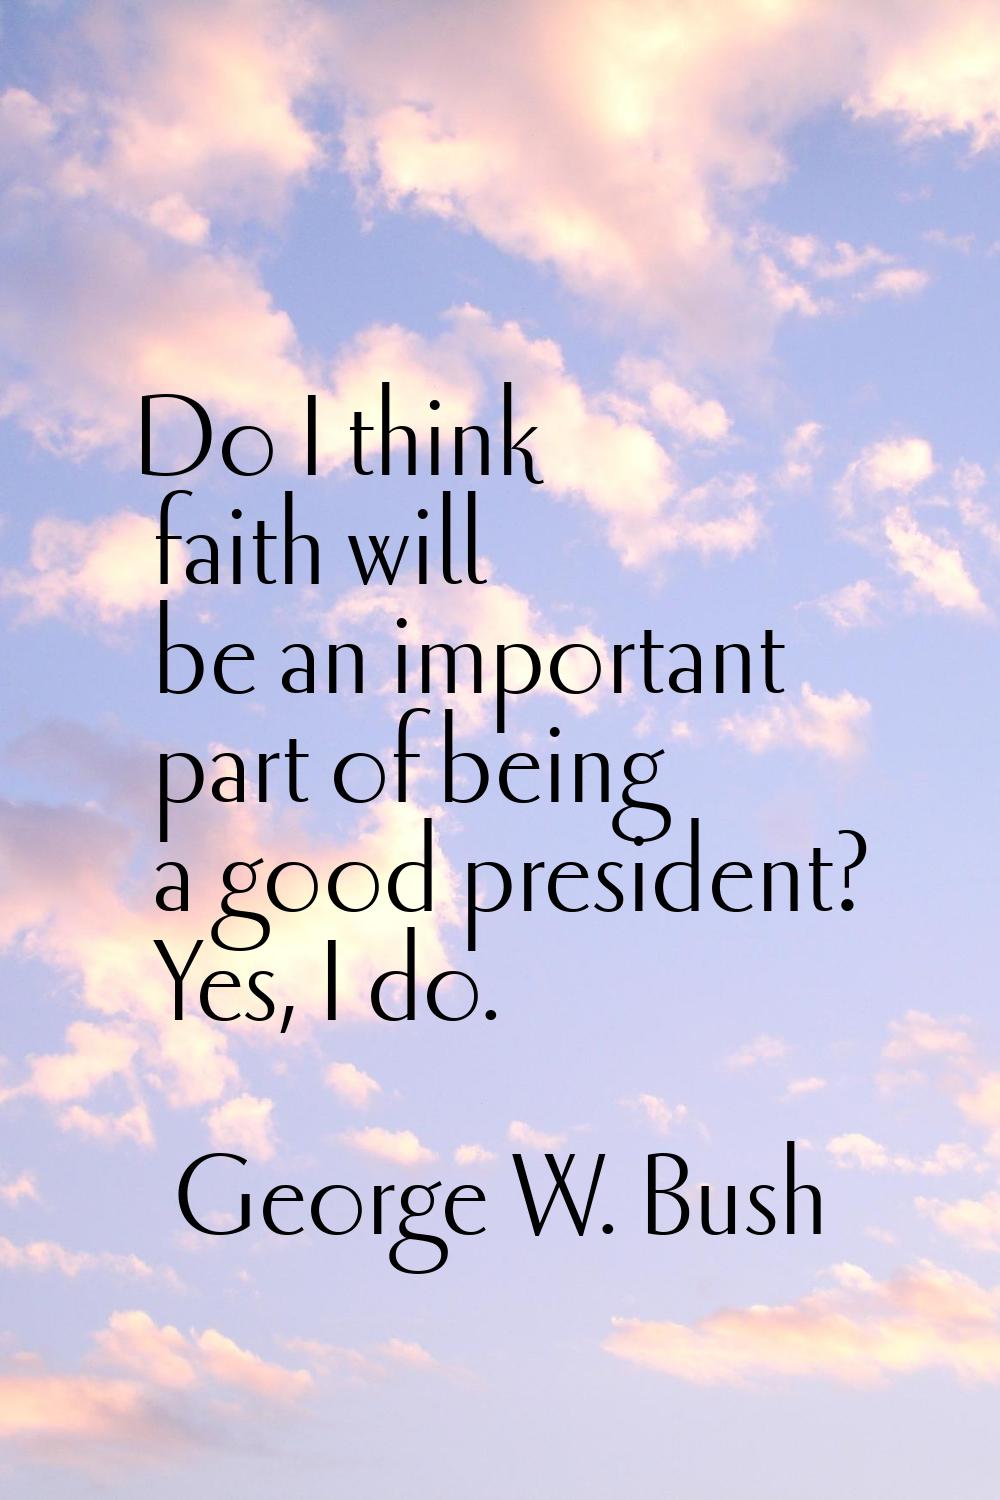 Do I think faith will be an important part of being a good president? Yes, I do.